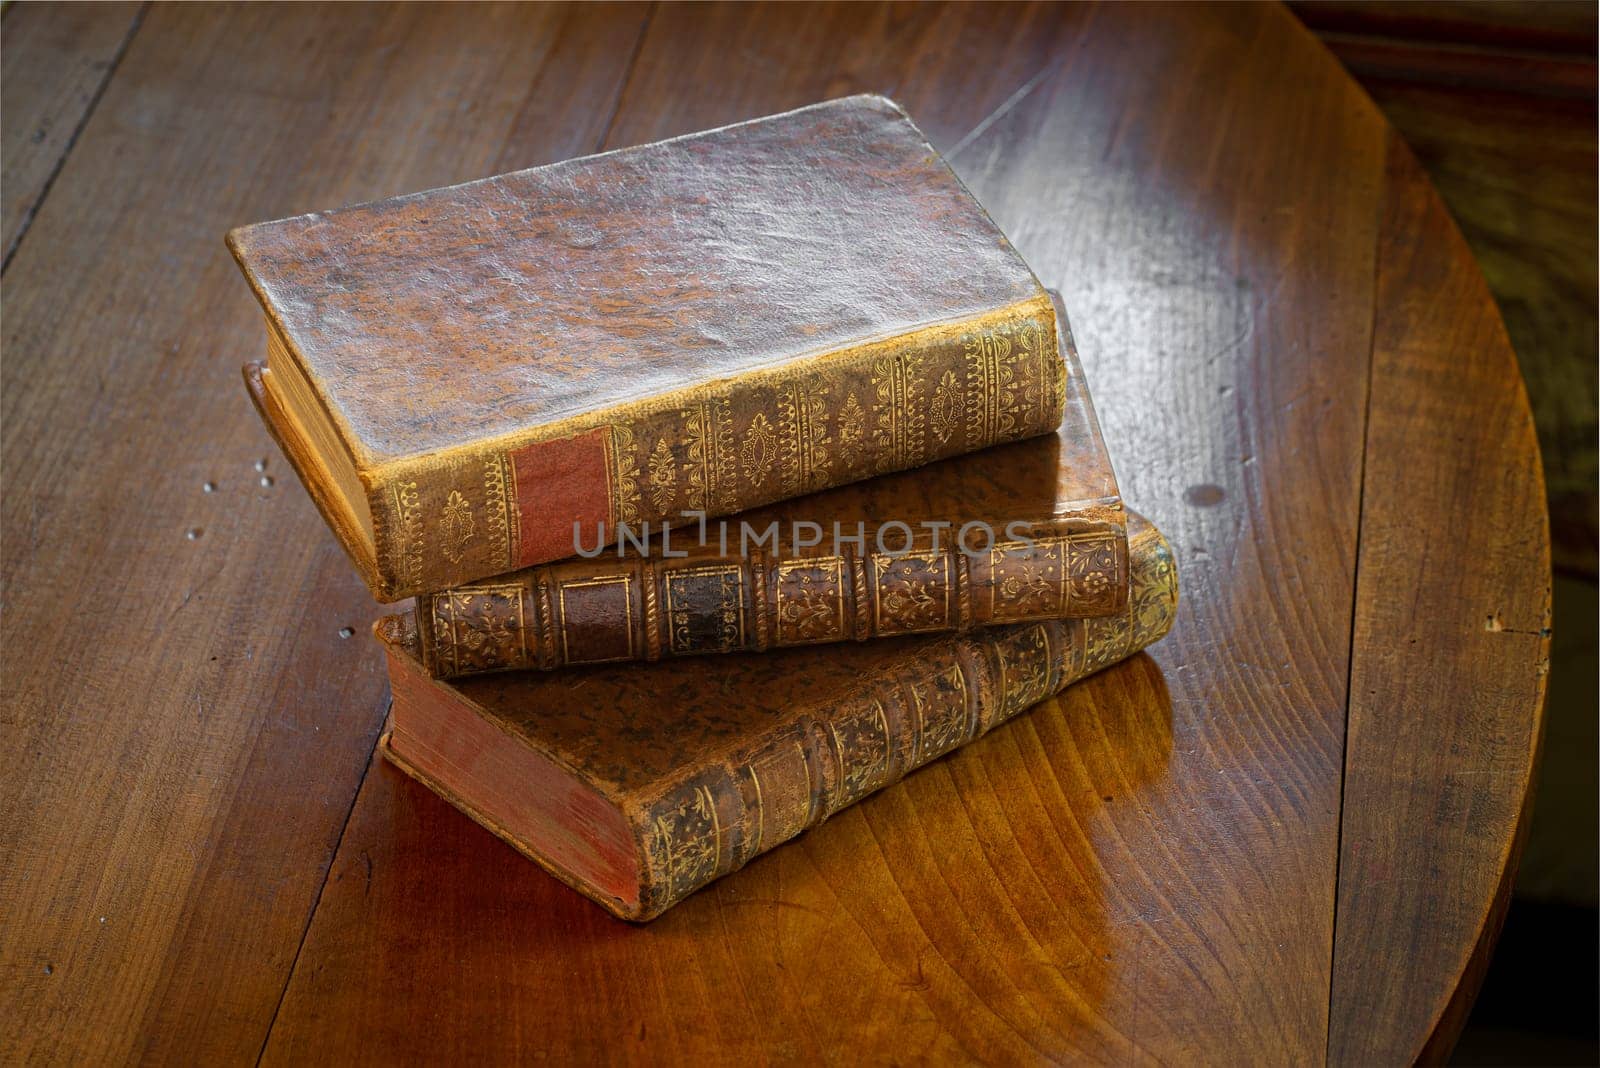 Antique books on a wooden table by MaxalTamor